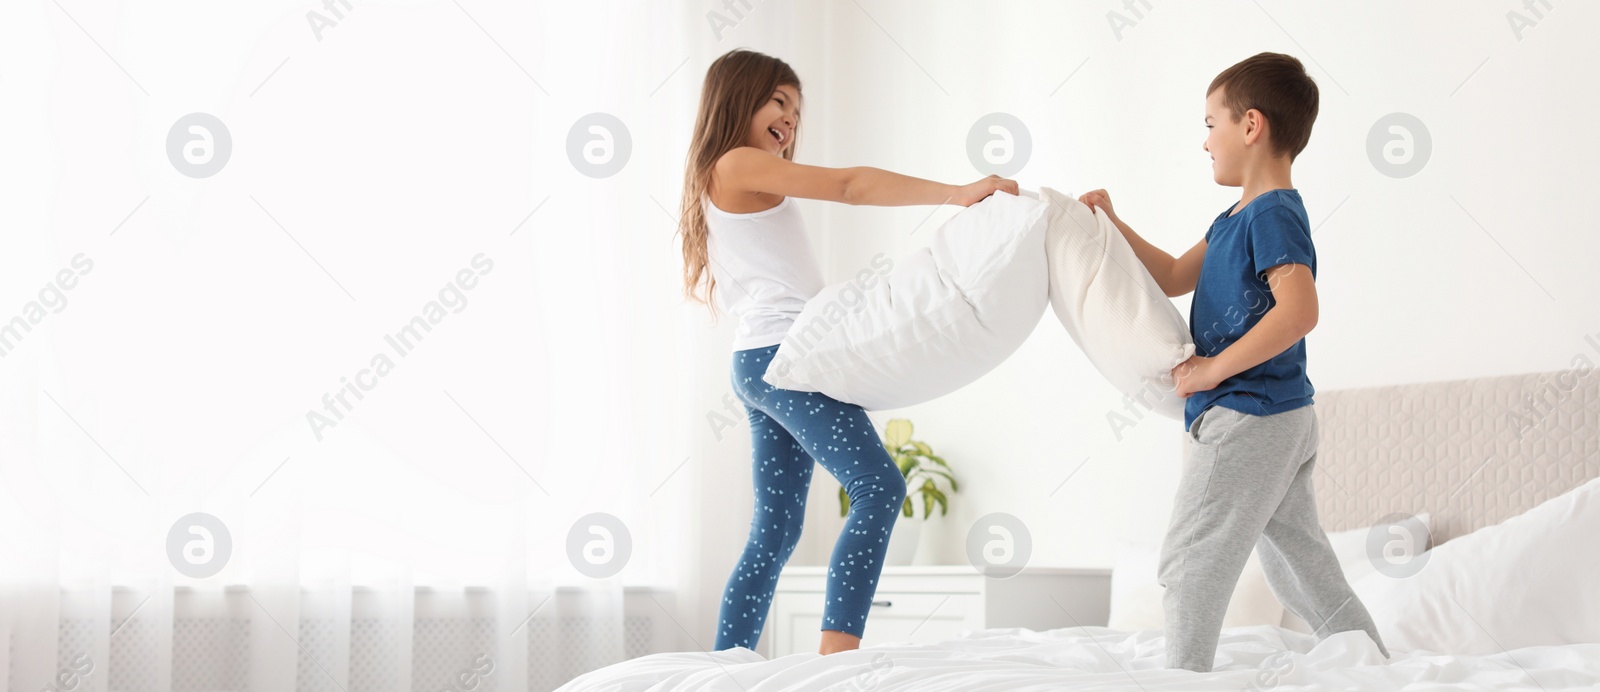 Image of Happy children having pillow fight in bedroom, space for text. Banner design